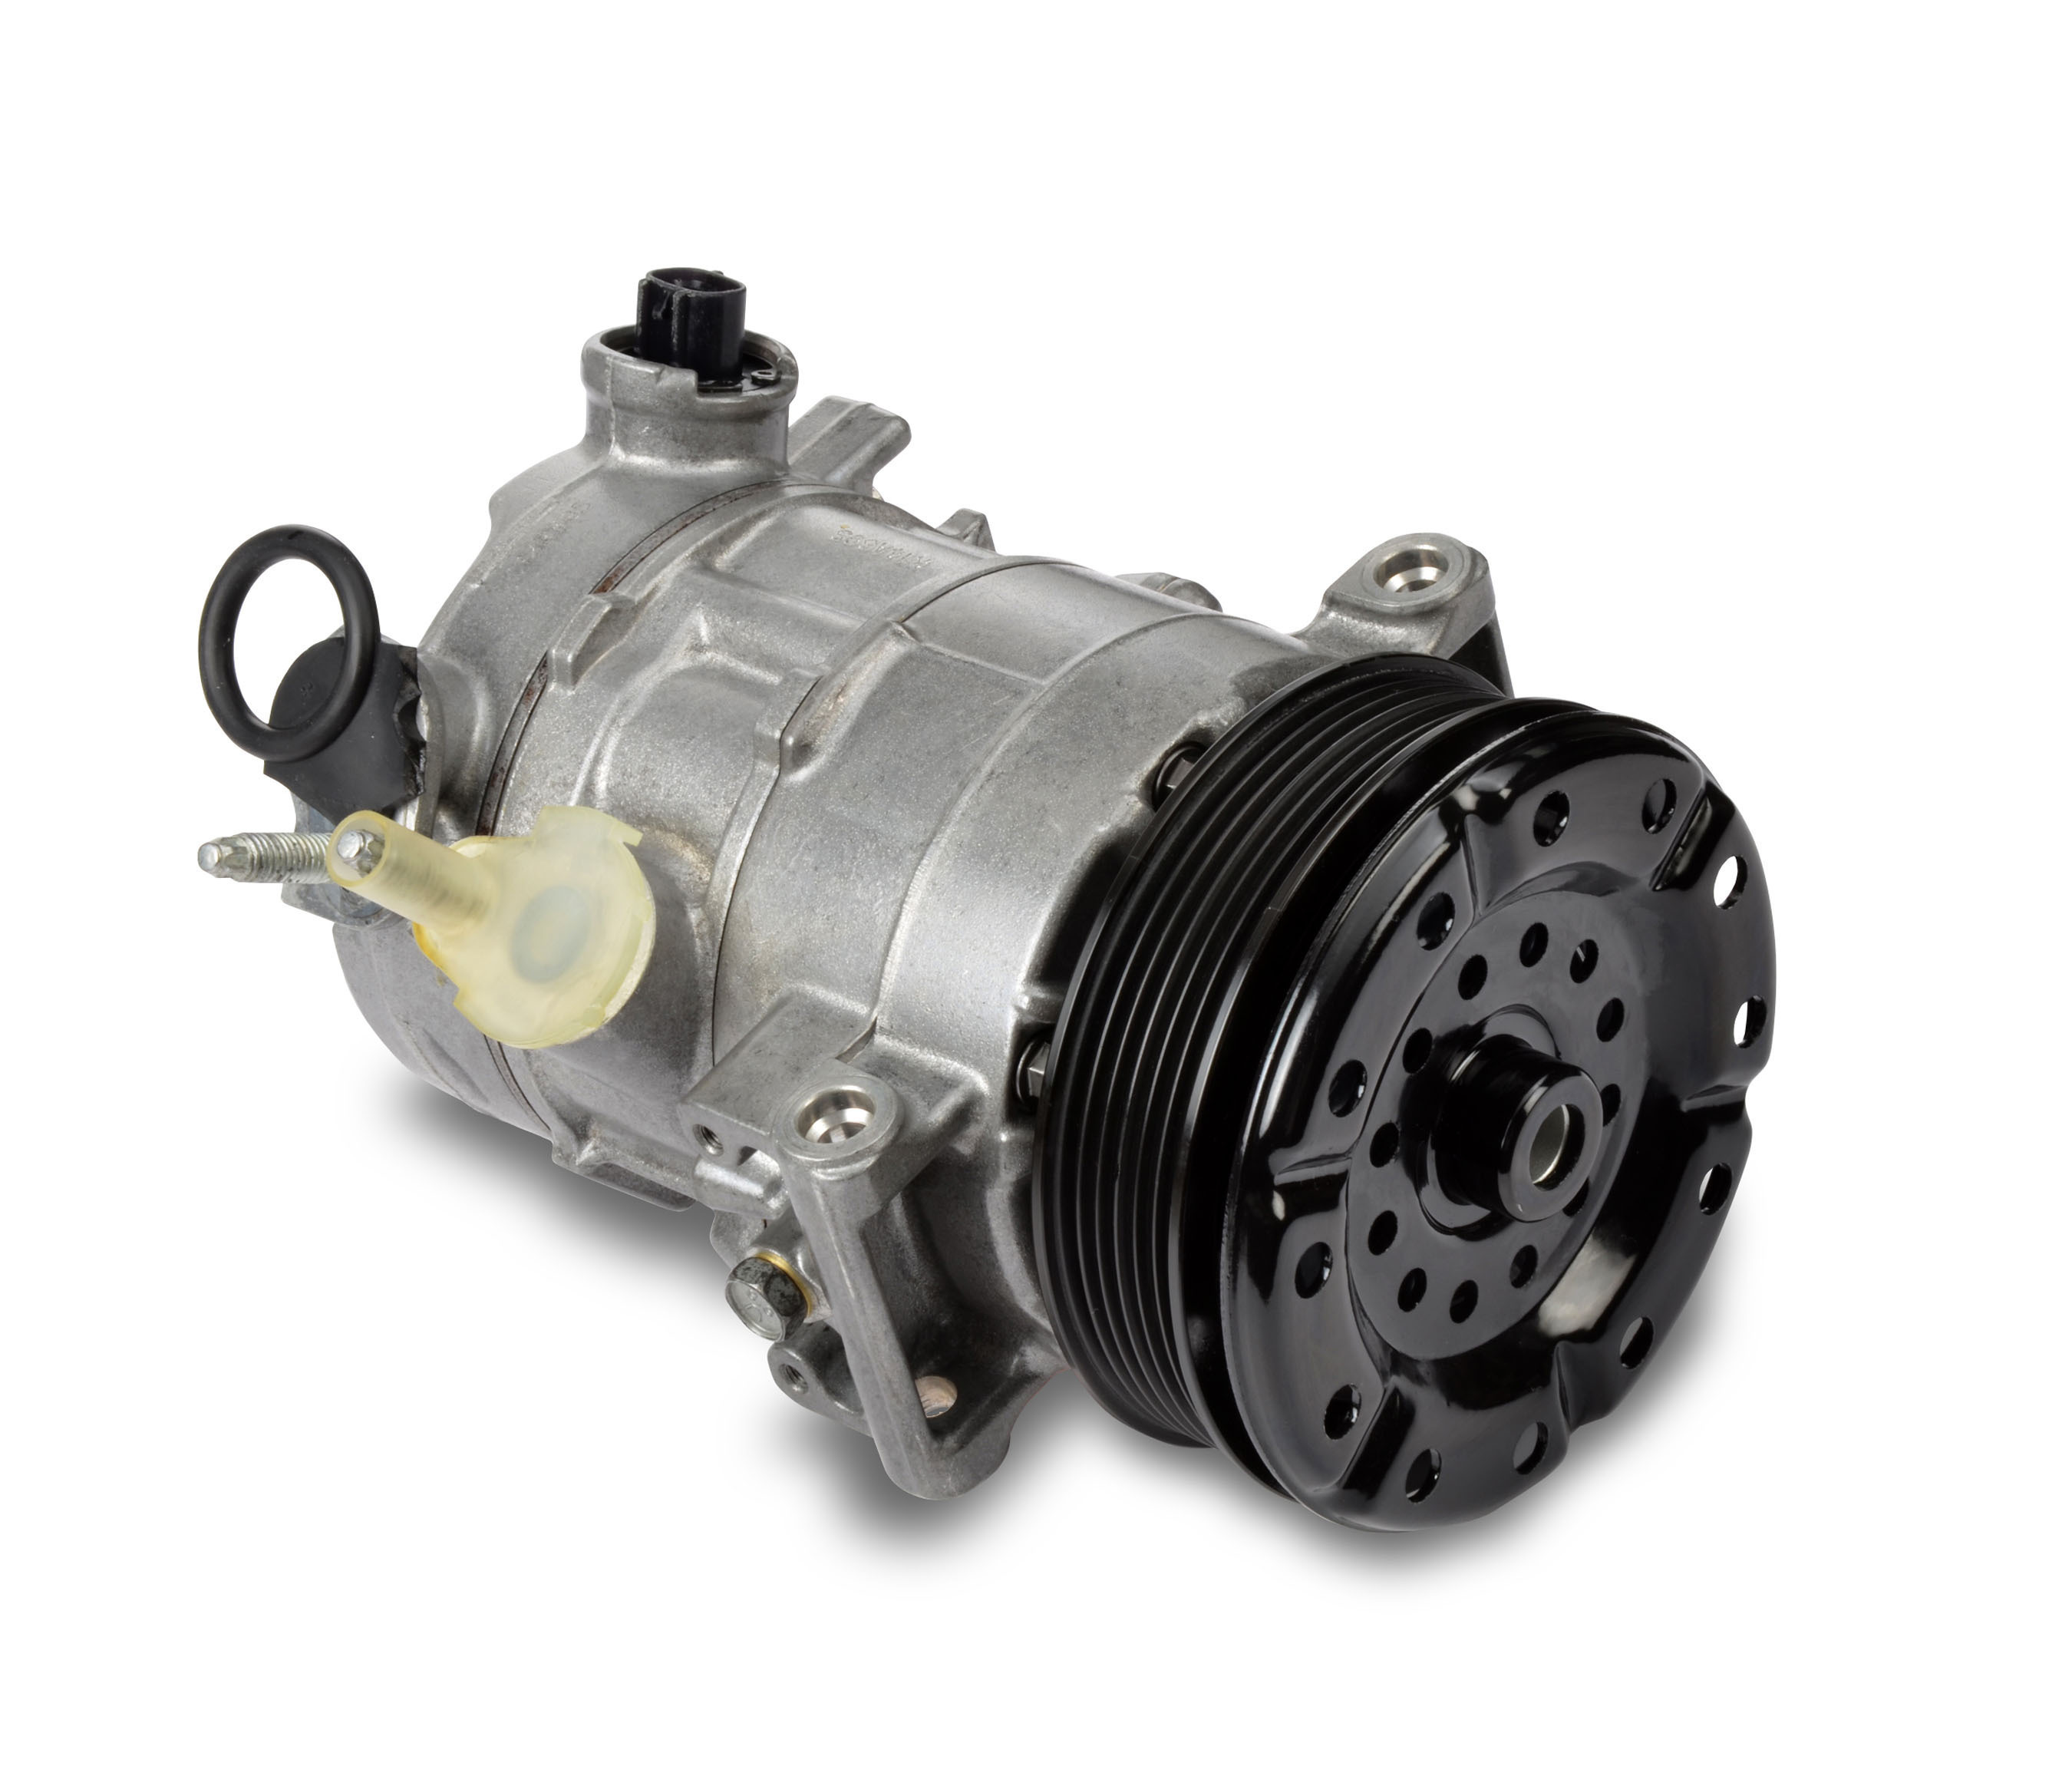 Mopar Reman A/C Compressors named in Top 10 products by Undercar Digest. (PRNewsFoto/Chrysler Group LLC) (PRNewsFoto/CHRYSLER GROUP LLC)